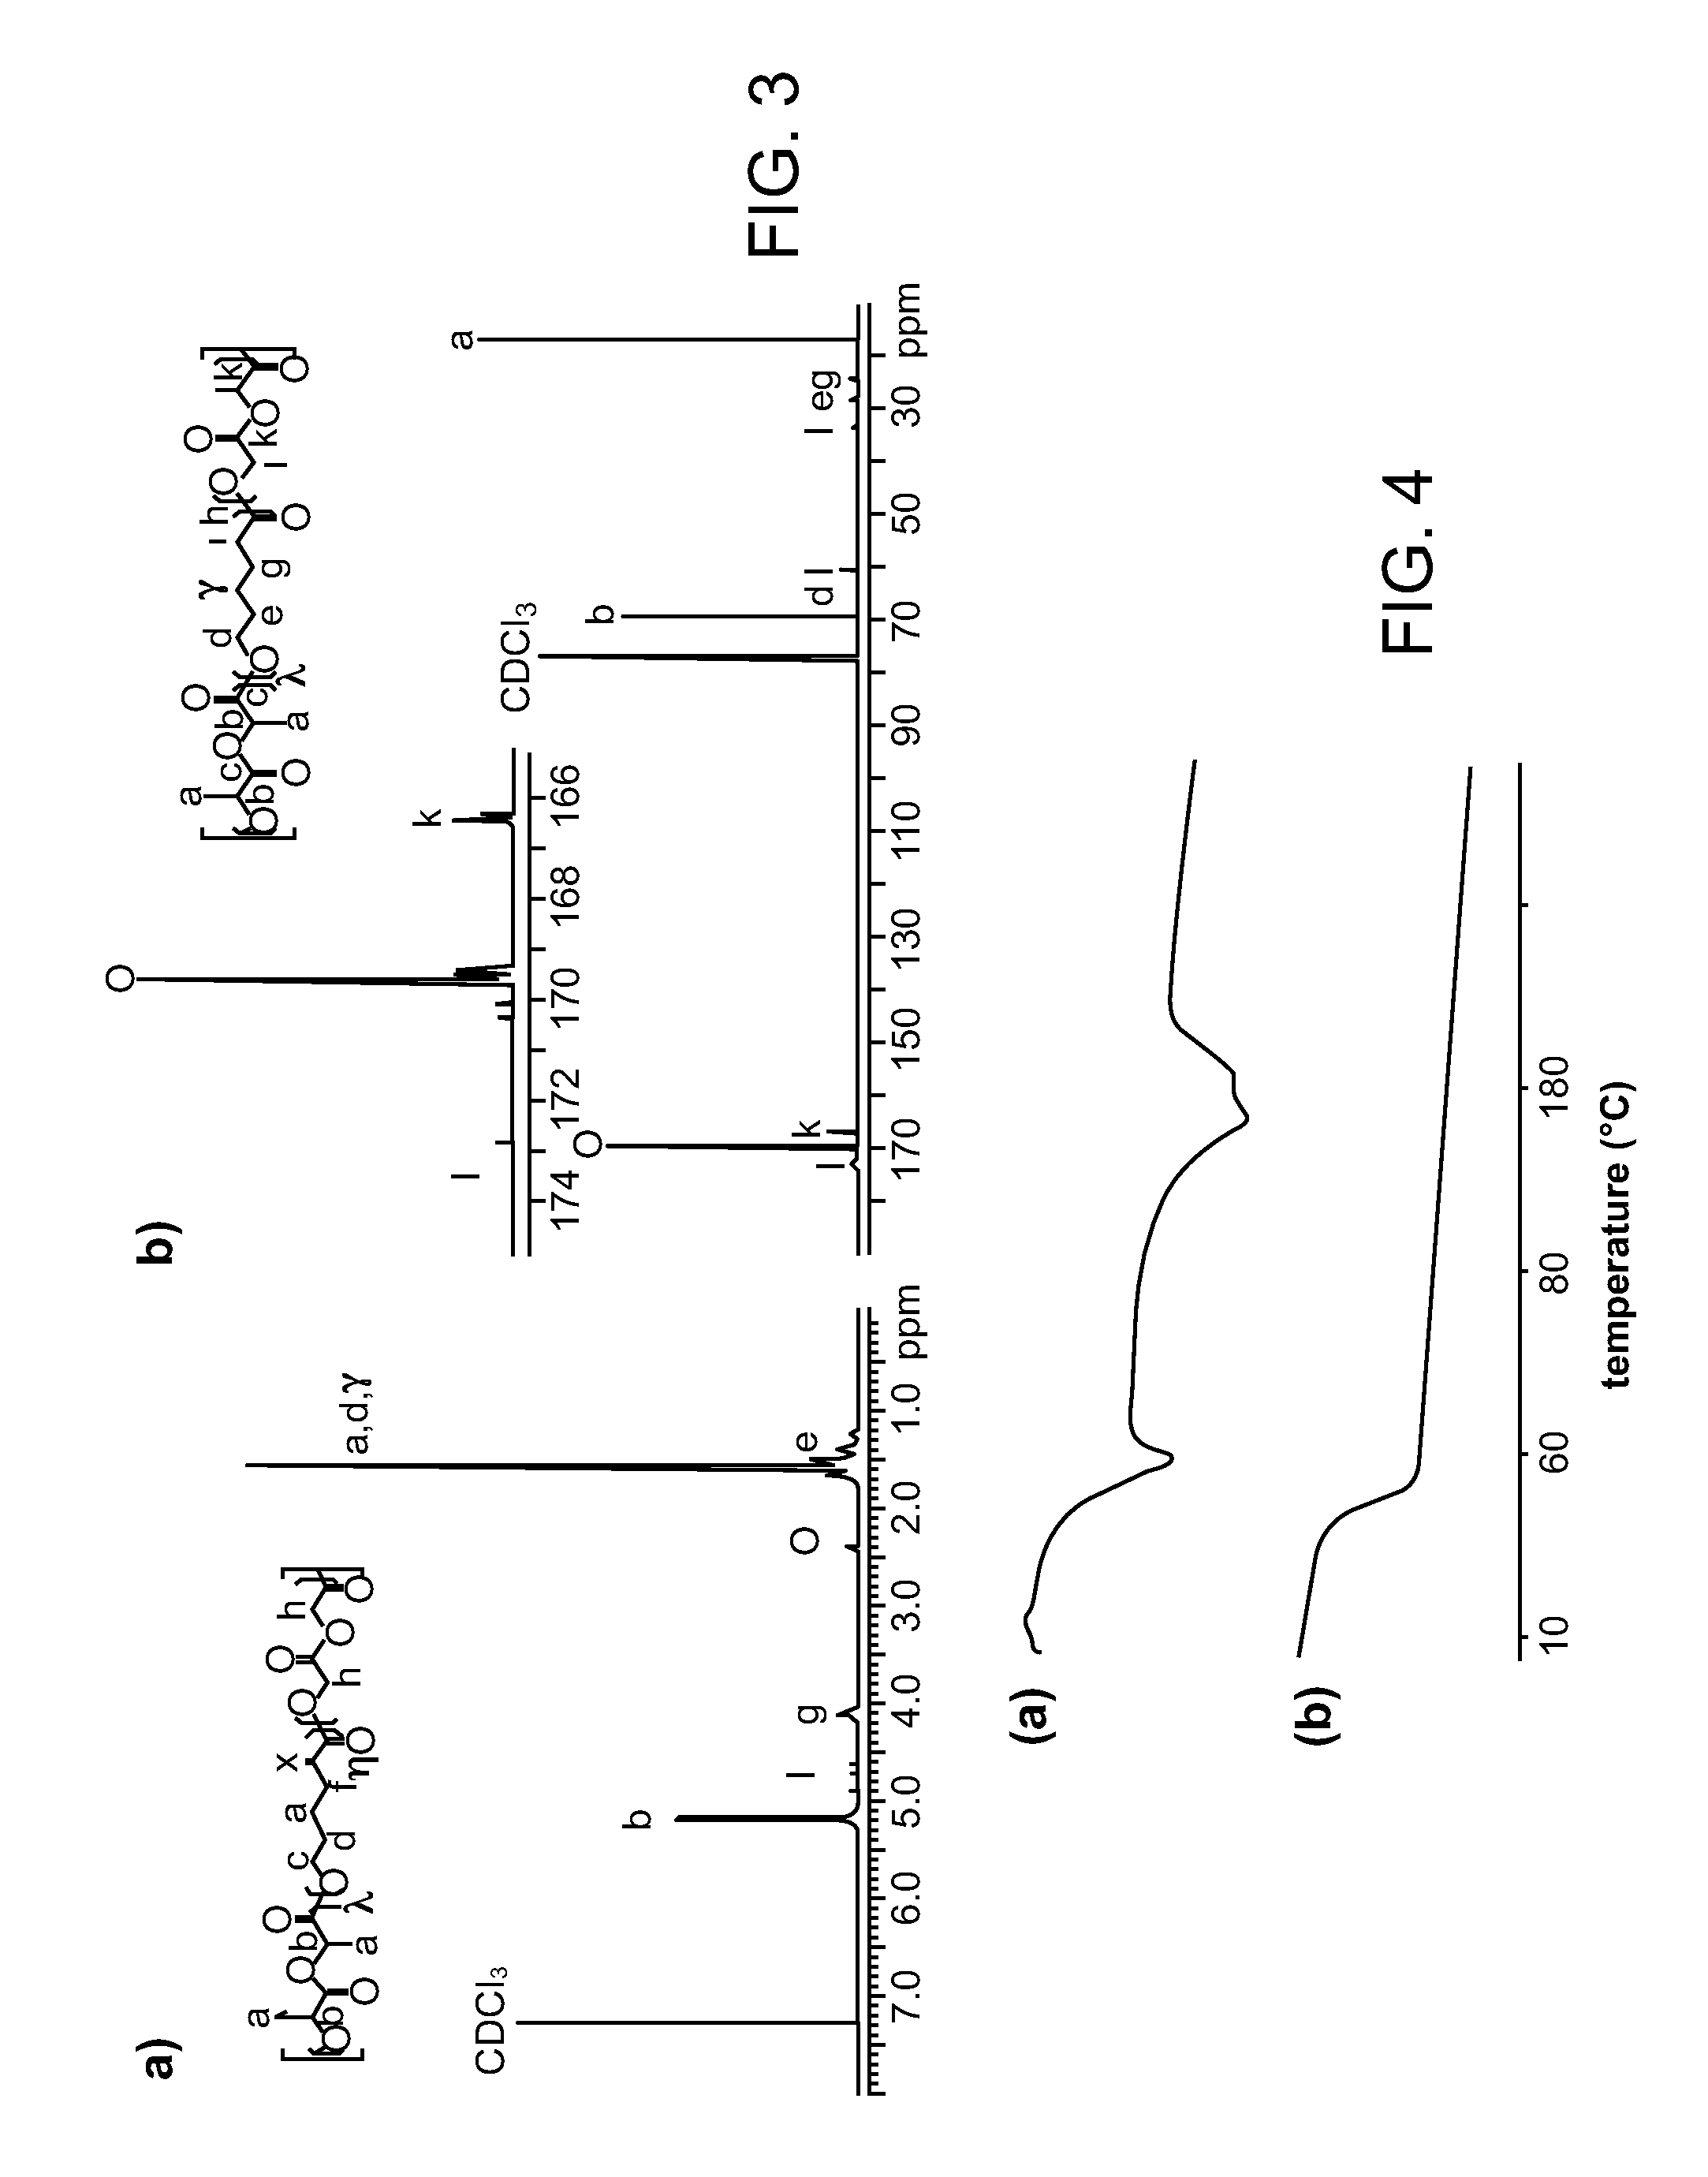 Terpolymers containing lactide and glycolide